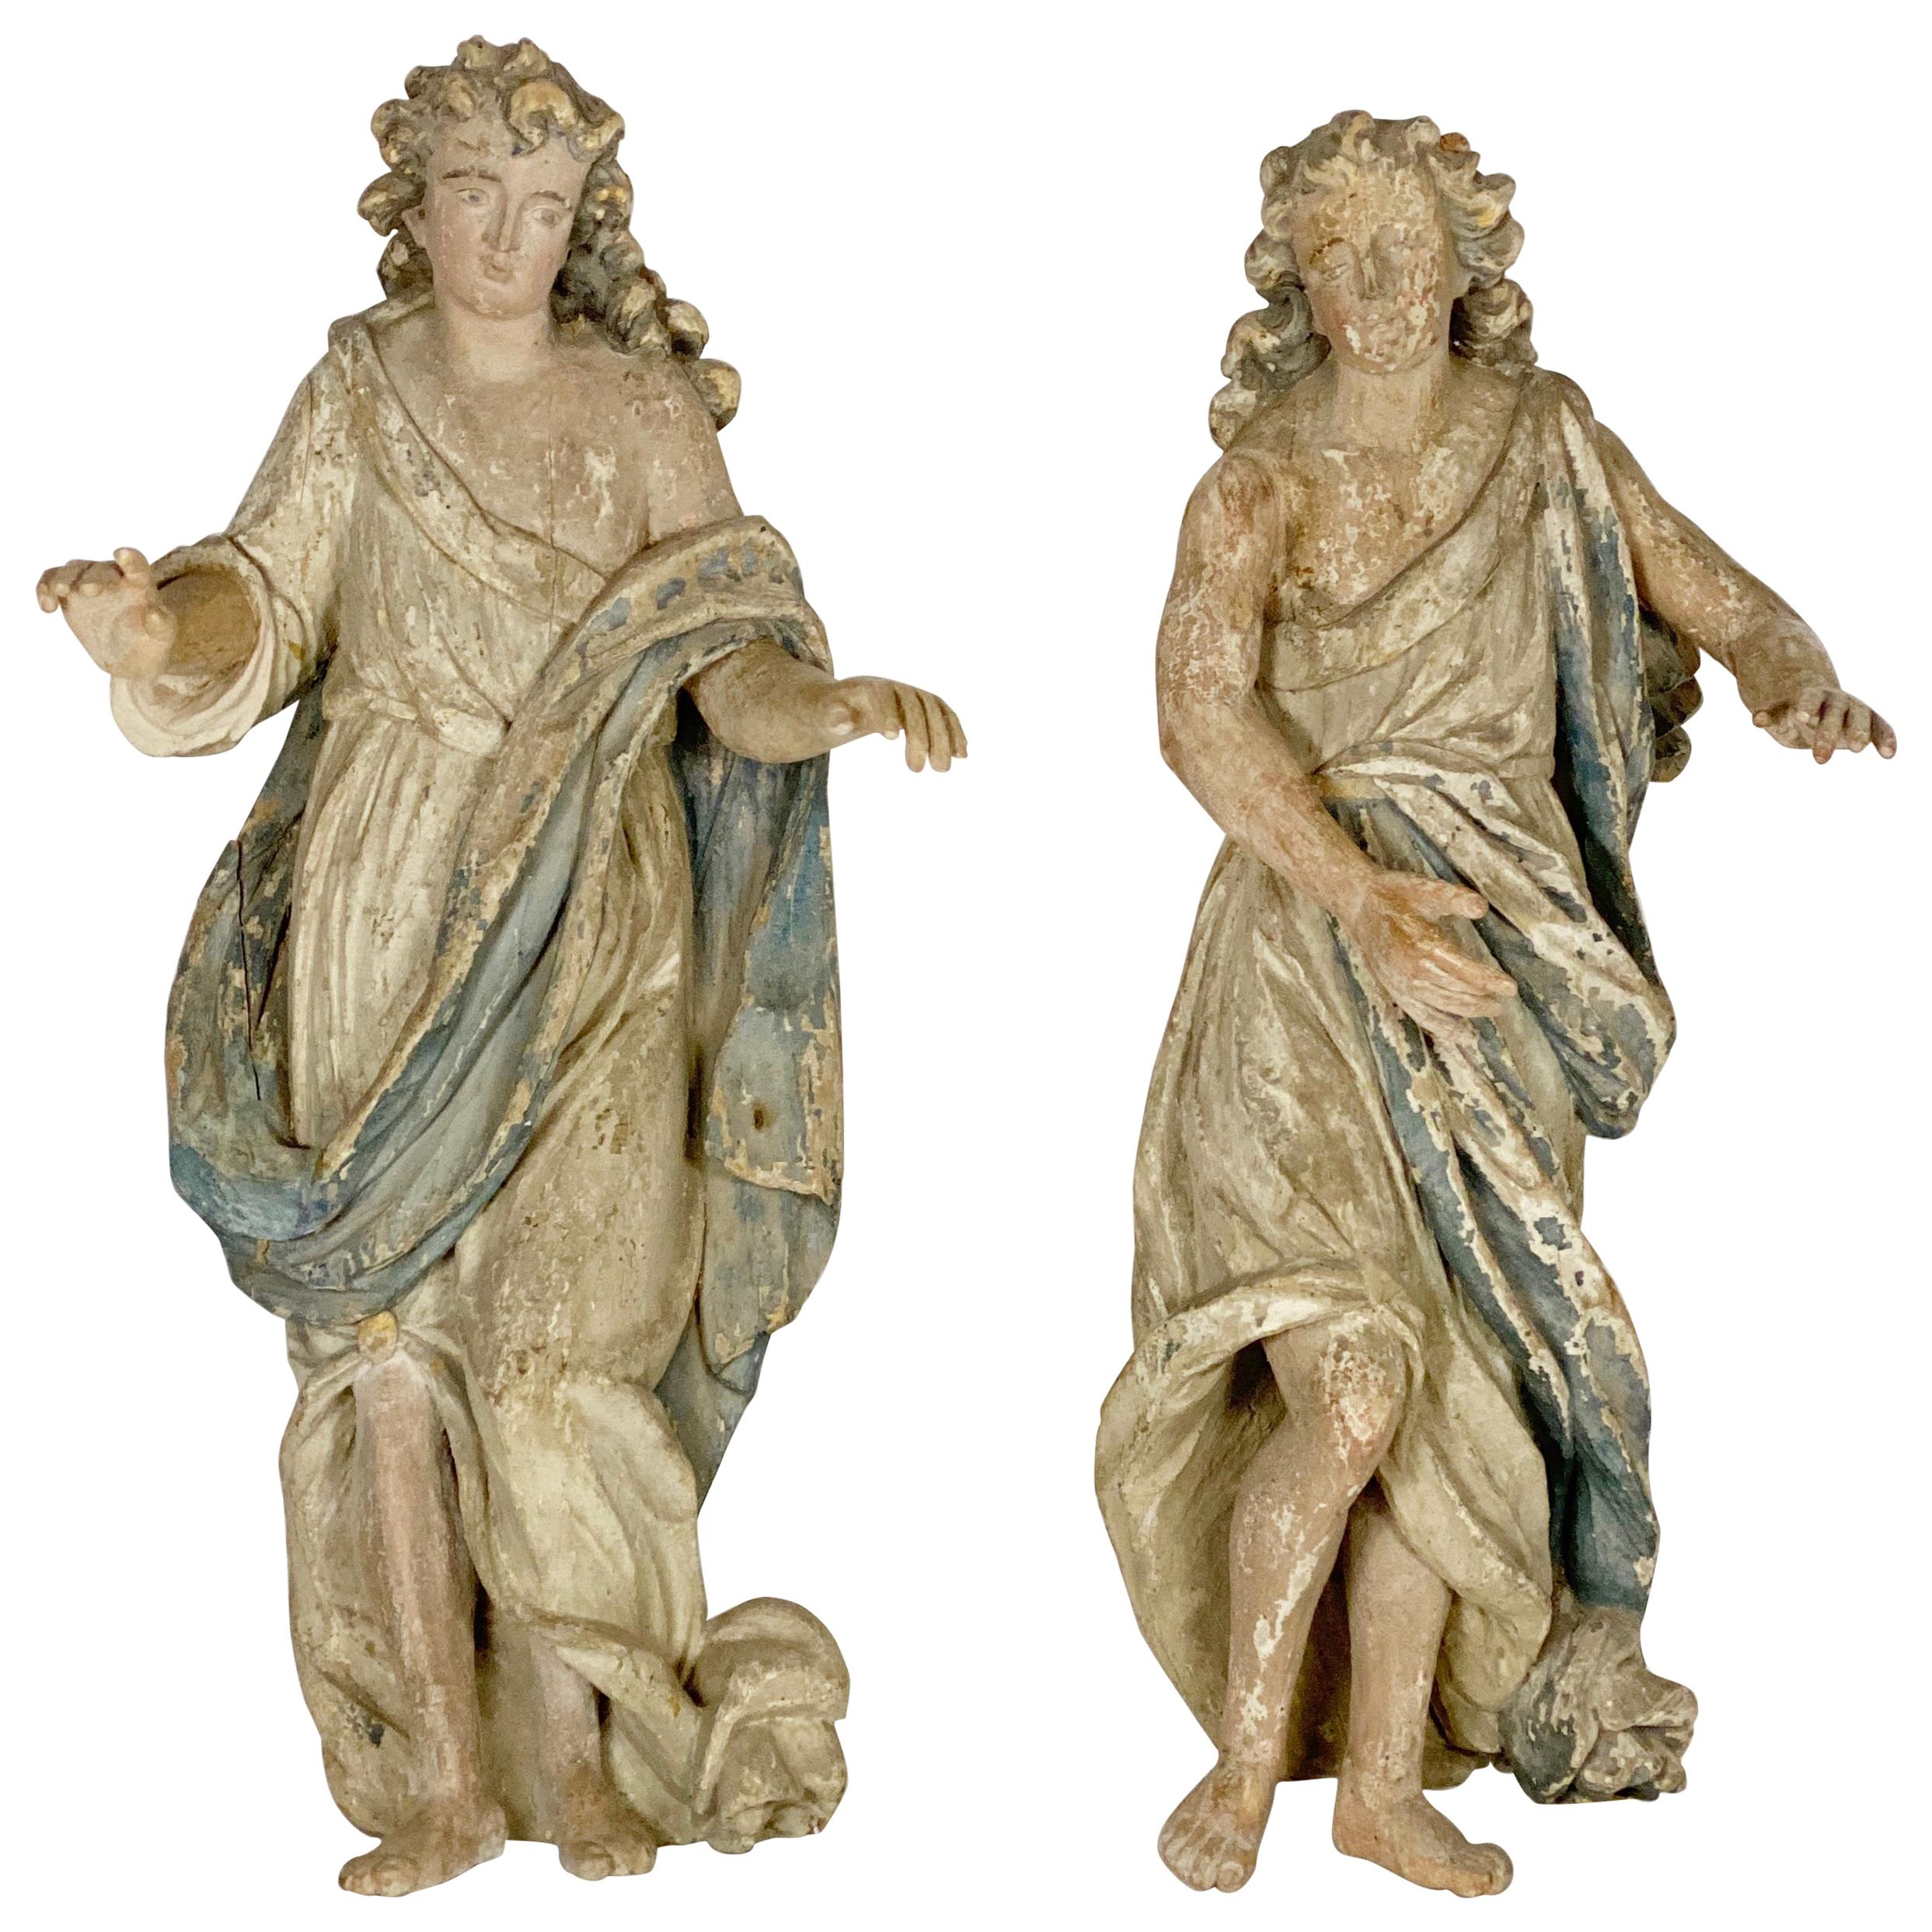 Pair of Wood Angels Sculptures, France, 18th Century